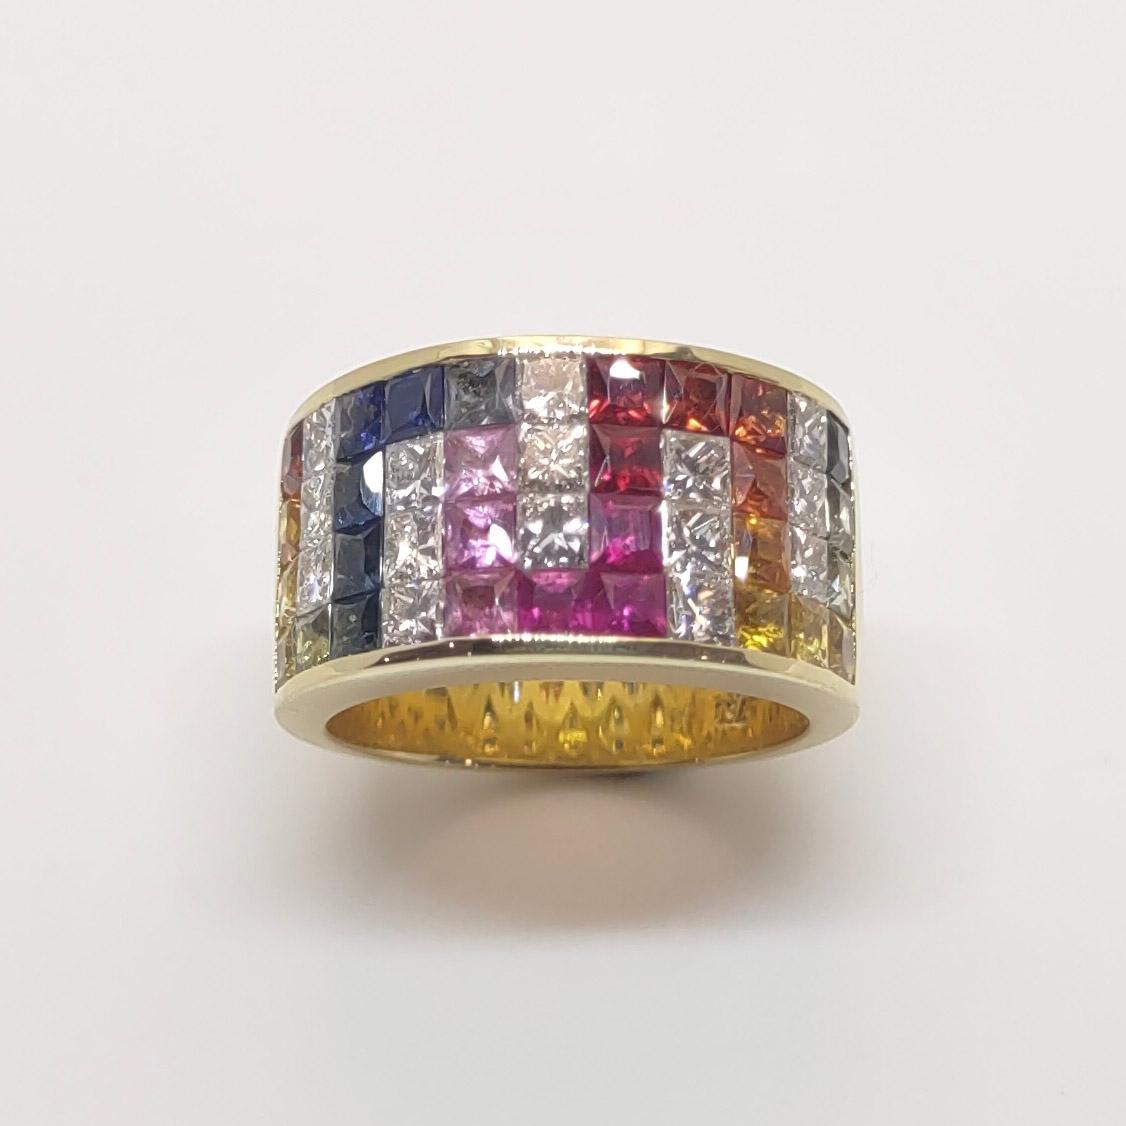 S.Georgios designer 18 Karat Yellow Gold Band Ring with 4 rows of invisible set Rainbow color Princess Cut natural Sapphires a total weight of 3.47 Carat and 1.58 Carat Princess Cut White Diamonds. The gems are set in a way that the Sapphires create